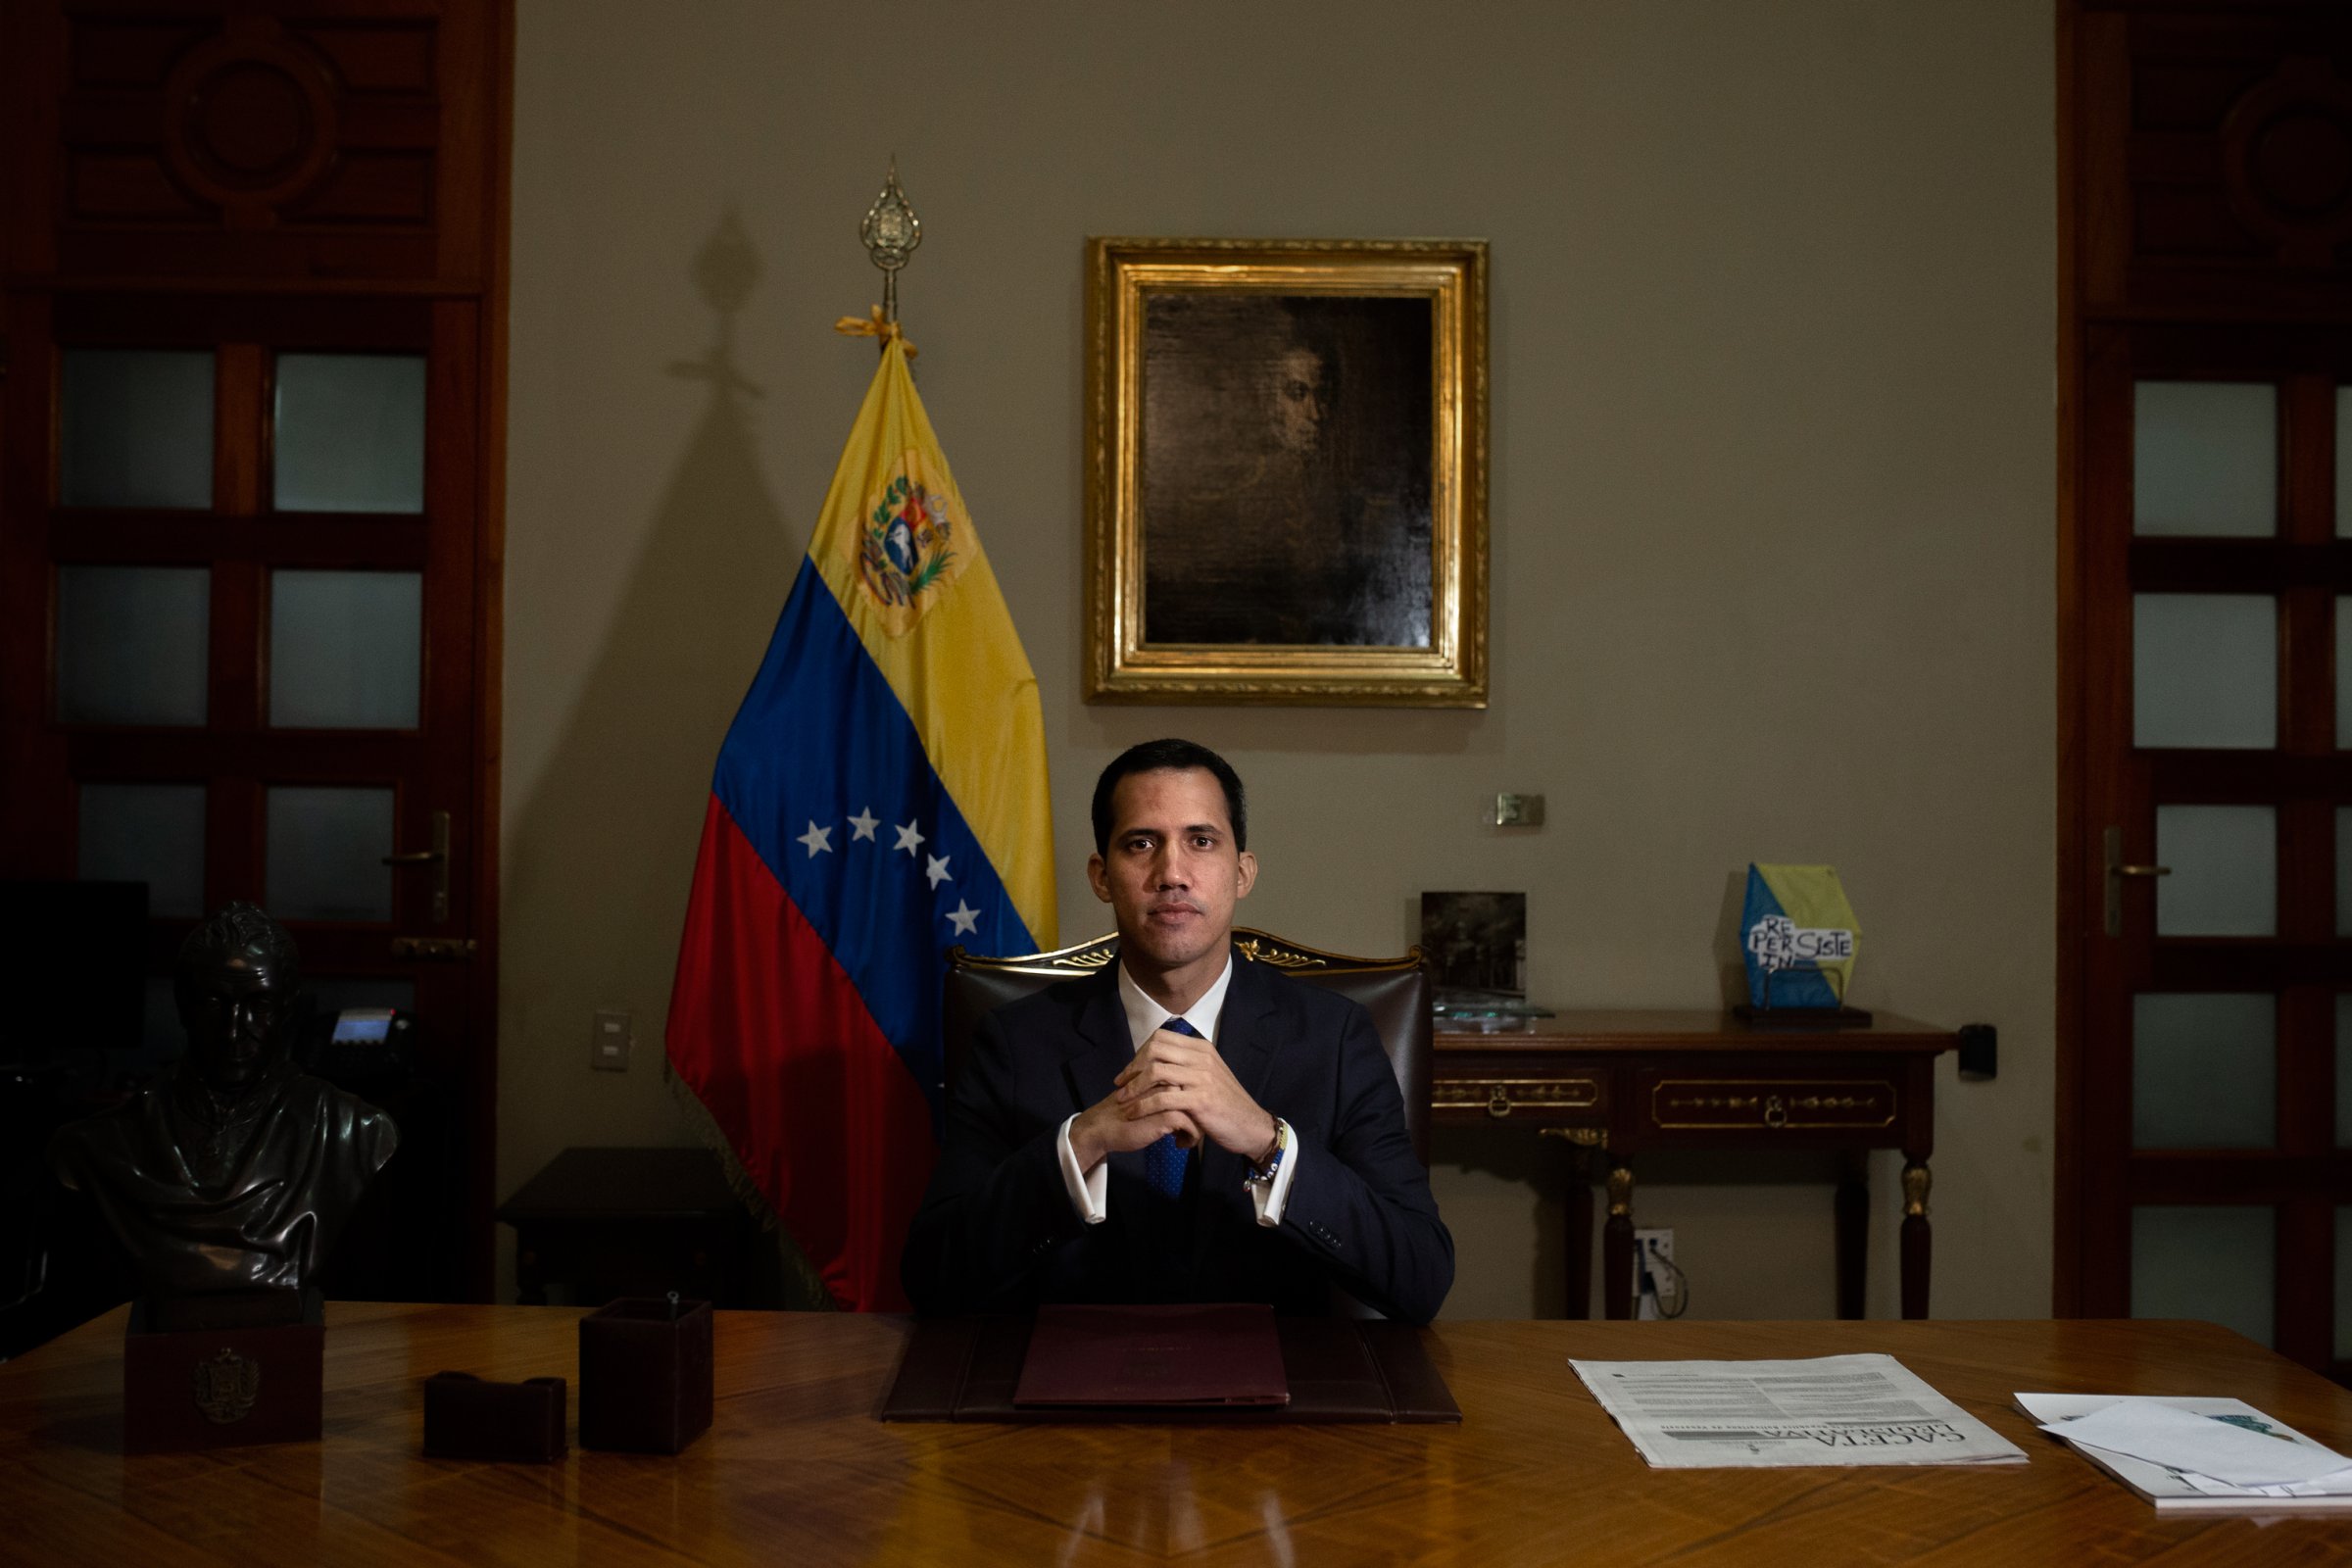 Juan Guaidó poses for a portrait in his office in Caracas, Venezuela, on Feb. 5, 2019.